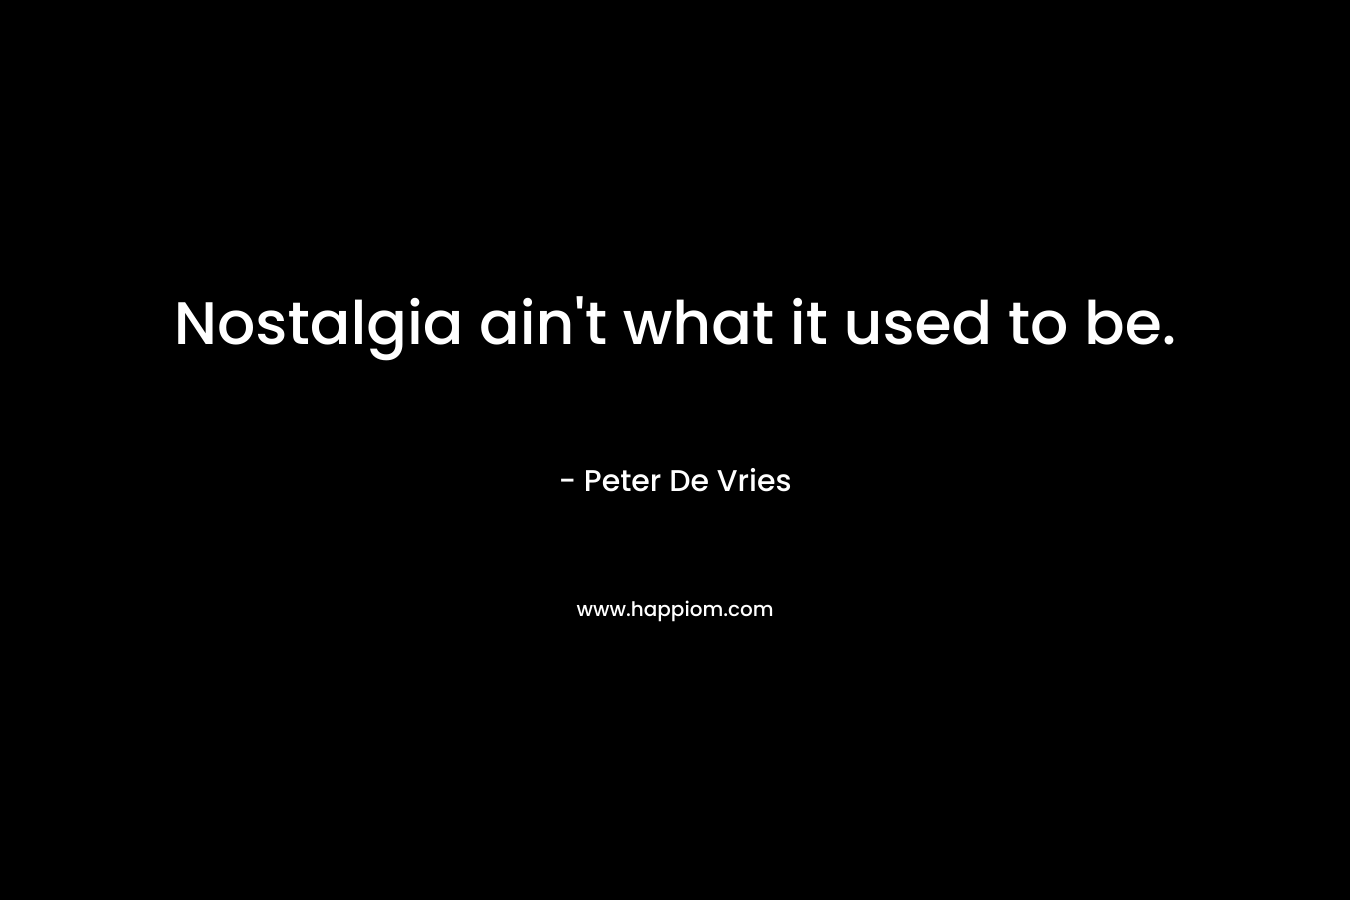 Nostalgia ain’t what it used to be. – Peter De Vries